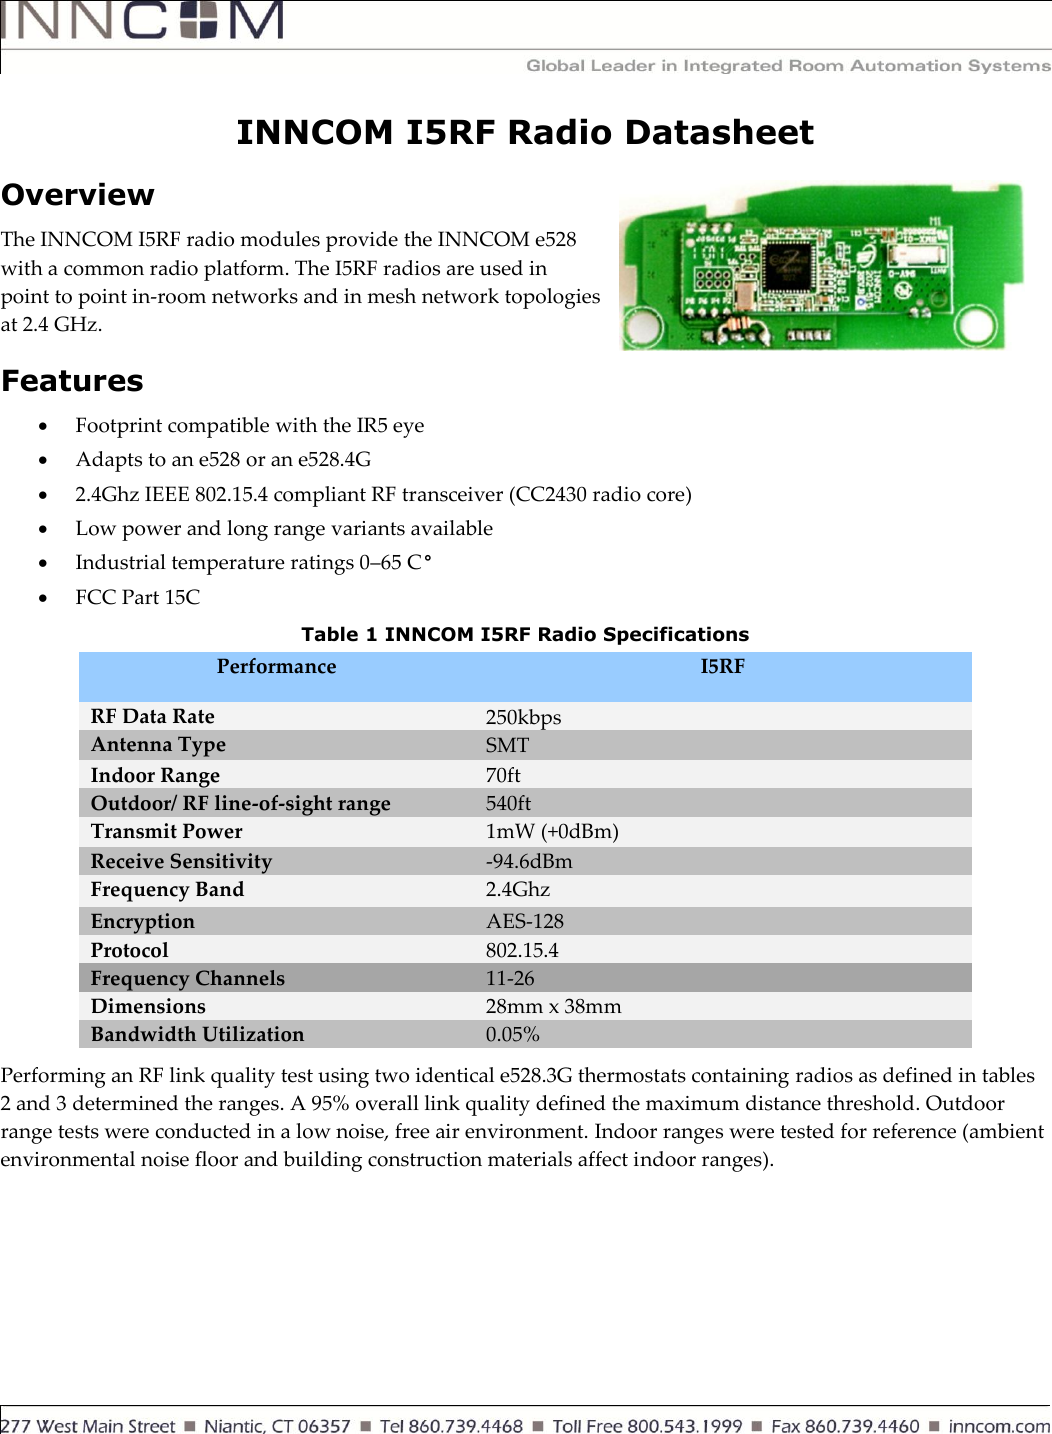     INNCOM I5RF Radio Datasheet Overview The INNCOM I5RF radio modules provide the INNCOM e528 with a common radio platform. The I5RF radios are used in point to point in-room networks and in mesh network topologies at 2.4 GHz.  Features  Footprint compatible with the IR5 eye  Adapts to an e528 or an e528.4G  2.4Ghz IEEE 802.15.4 compliant RF transceiver (CC2430 radio core)  Low power and long range variants available  Industrial temperature ratings 0–65 C°  FCC Part 15C  Table 1 INNCOM I5RF Radio Specifications Performance I5RF RF Data Rate 250kbps Antenna Type SMT Indoor Range  70ft Outdoor/ RF line-of-sight range 540ft Transmit Power 1mW (+0dBm) Receive Sensitivity -94.6dBm Frequency Band 2.4Ghz Encryption AES-128 Protocol 802.15.4 Frequency Channels 11-26 Dimensions 28mm x 38mm Bandwidth Utilization 0.05% Performing an RF link quality test using two identical e528.3G thermostats containing radios as defined in tables 2 and 3 determined the ranges. A 95% overall link quality defined the maximum distance threshold. Outdoor range tests were conducted in a low noise, free air environment. Indoor ranges were tested for reference (ambient environmental noise floor and building construction materials affect indoor ranges).  